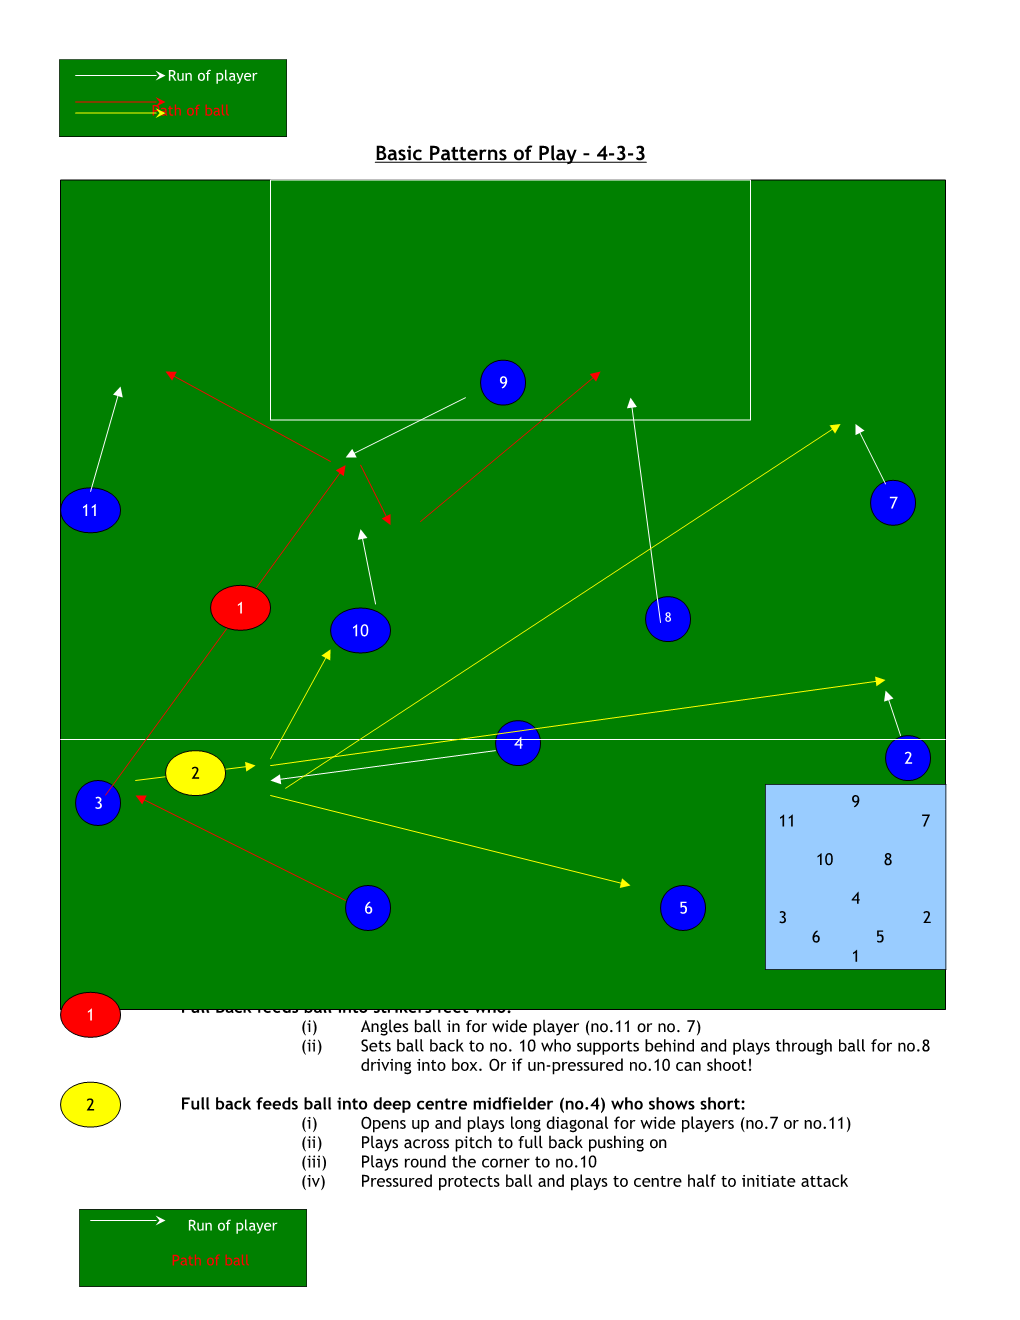 Basic Patterns of Play 4-3-3 Full Back Feeds Ball Into Strikers Feet Who